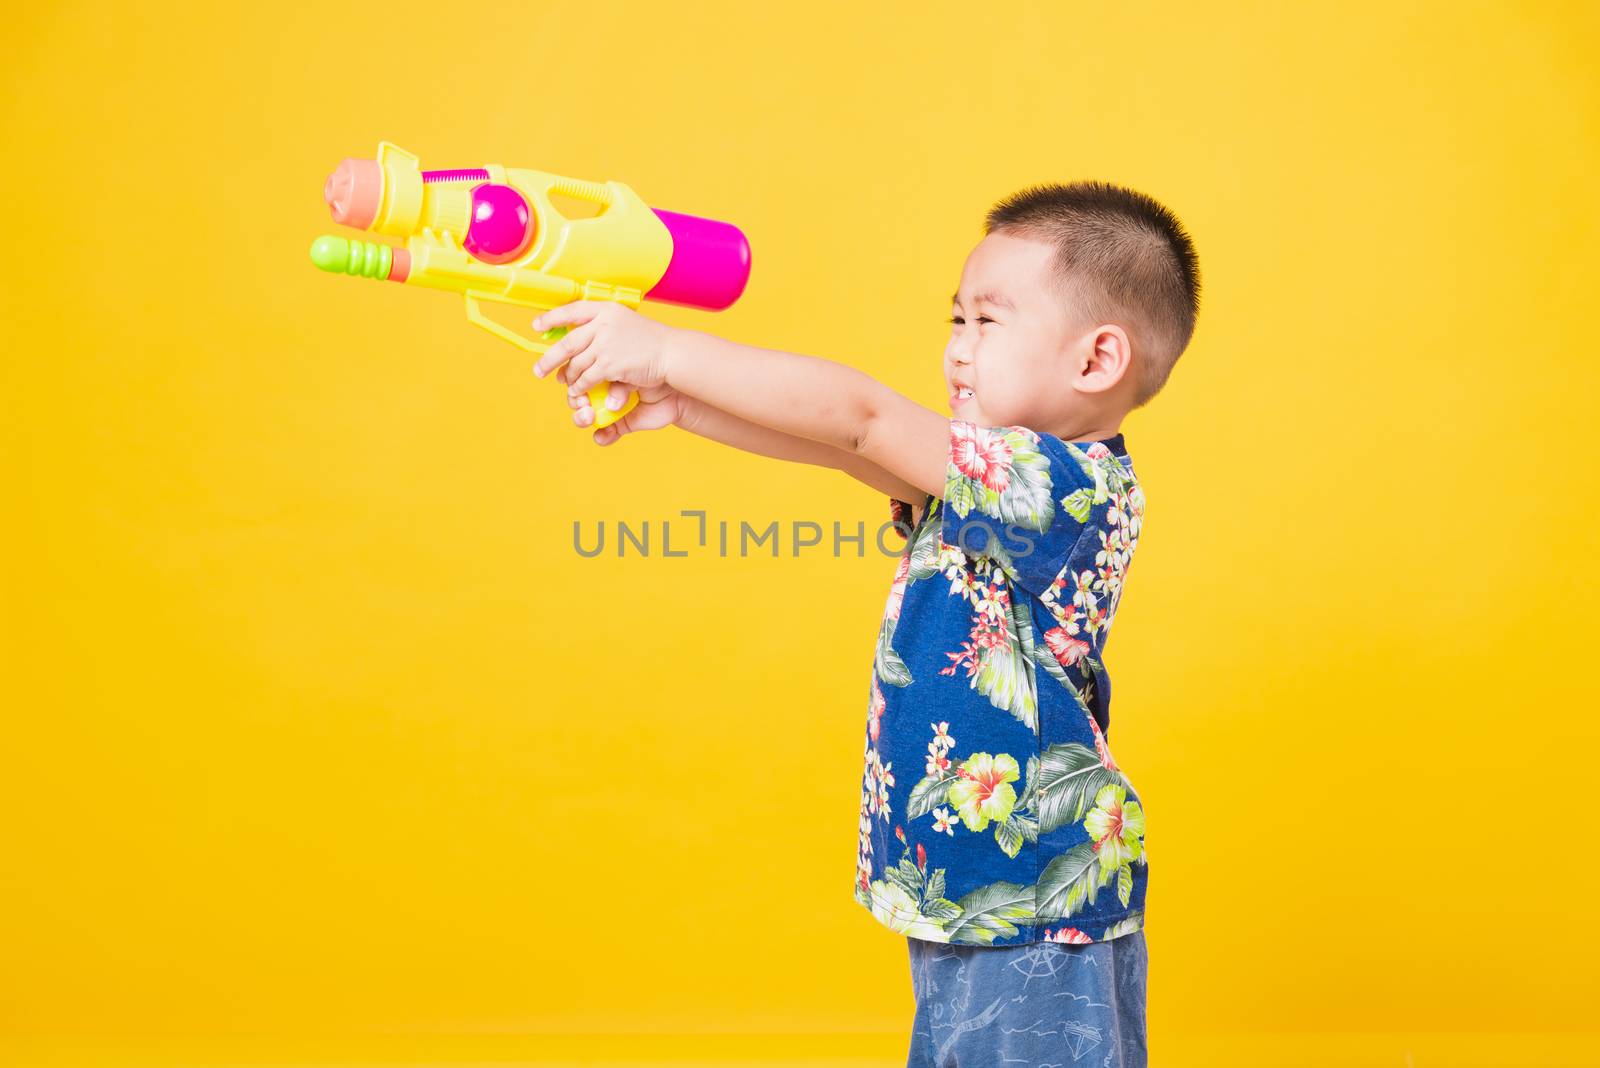 Portrait happy Asian cute little children boy smile standing so happy wearing flower shirt in Songkran festival day holding water gun, studio shot on yellow background with copy space